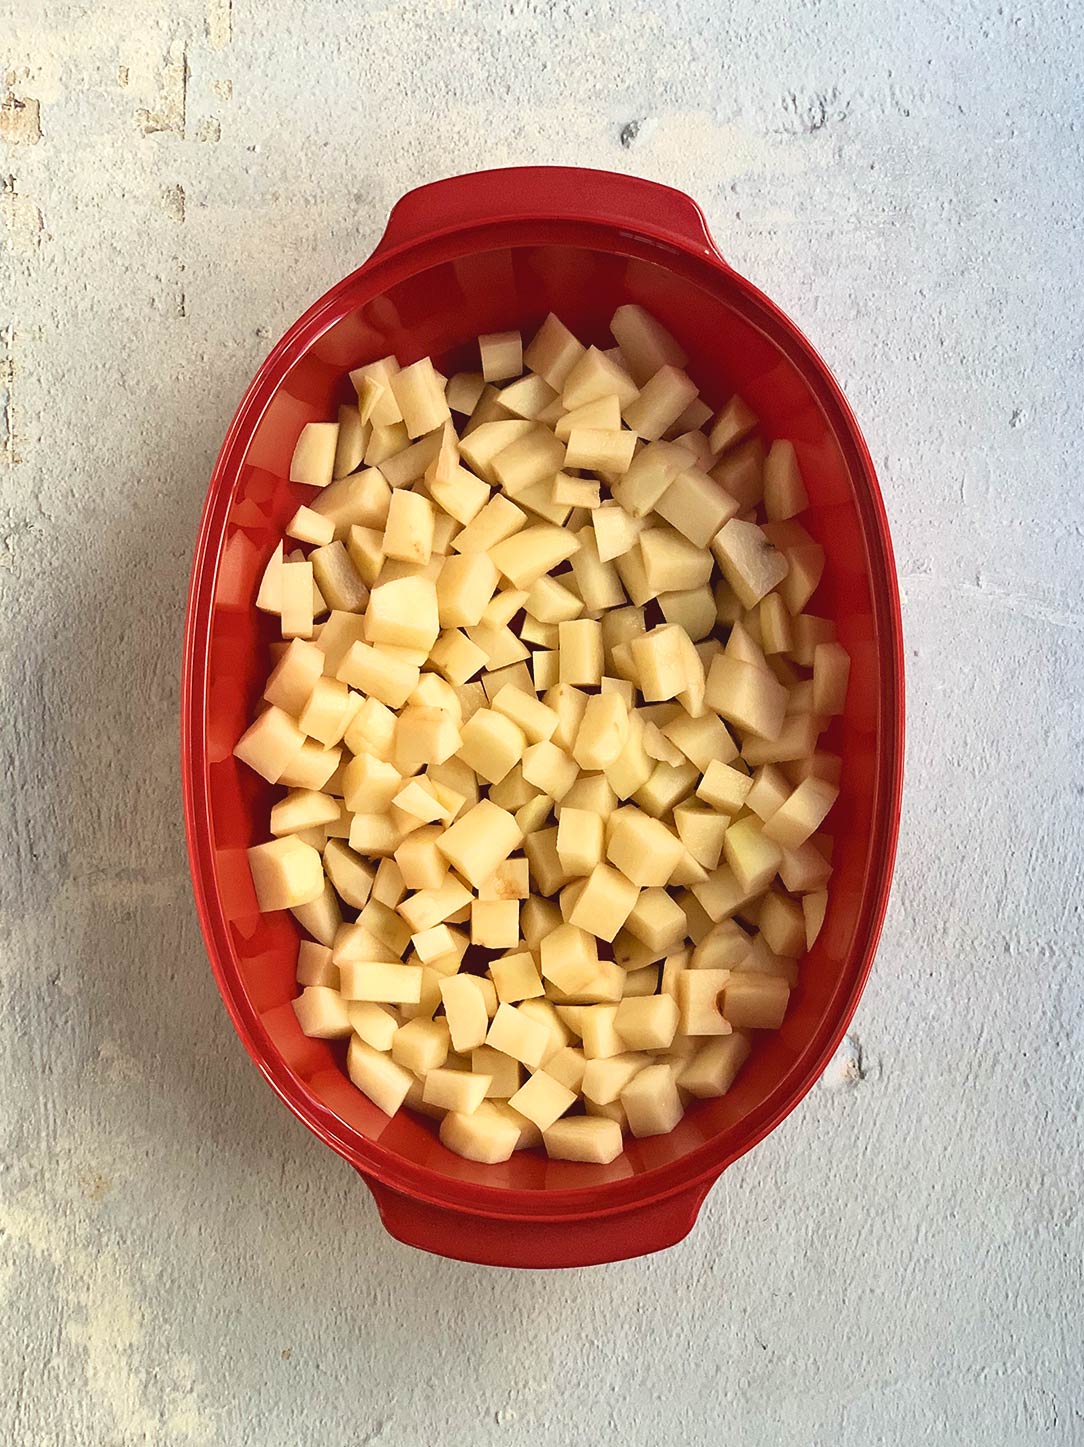 Diced potatoes in red microwave bowl.